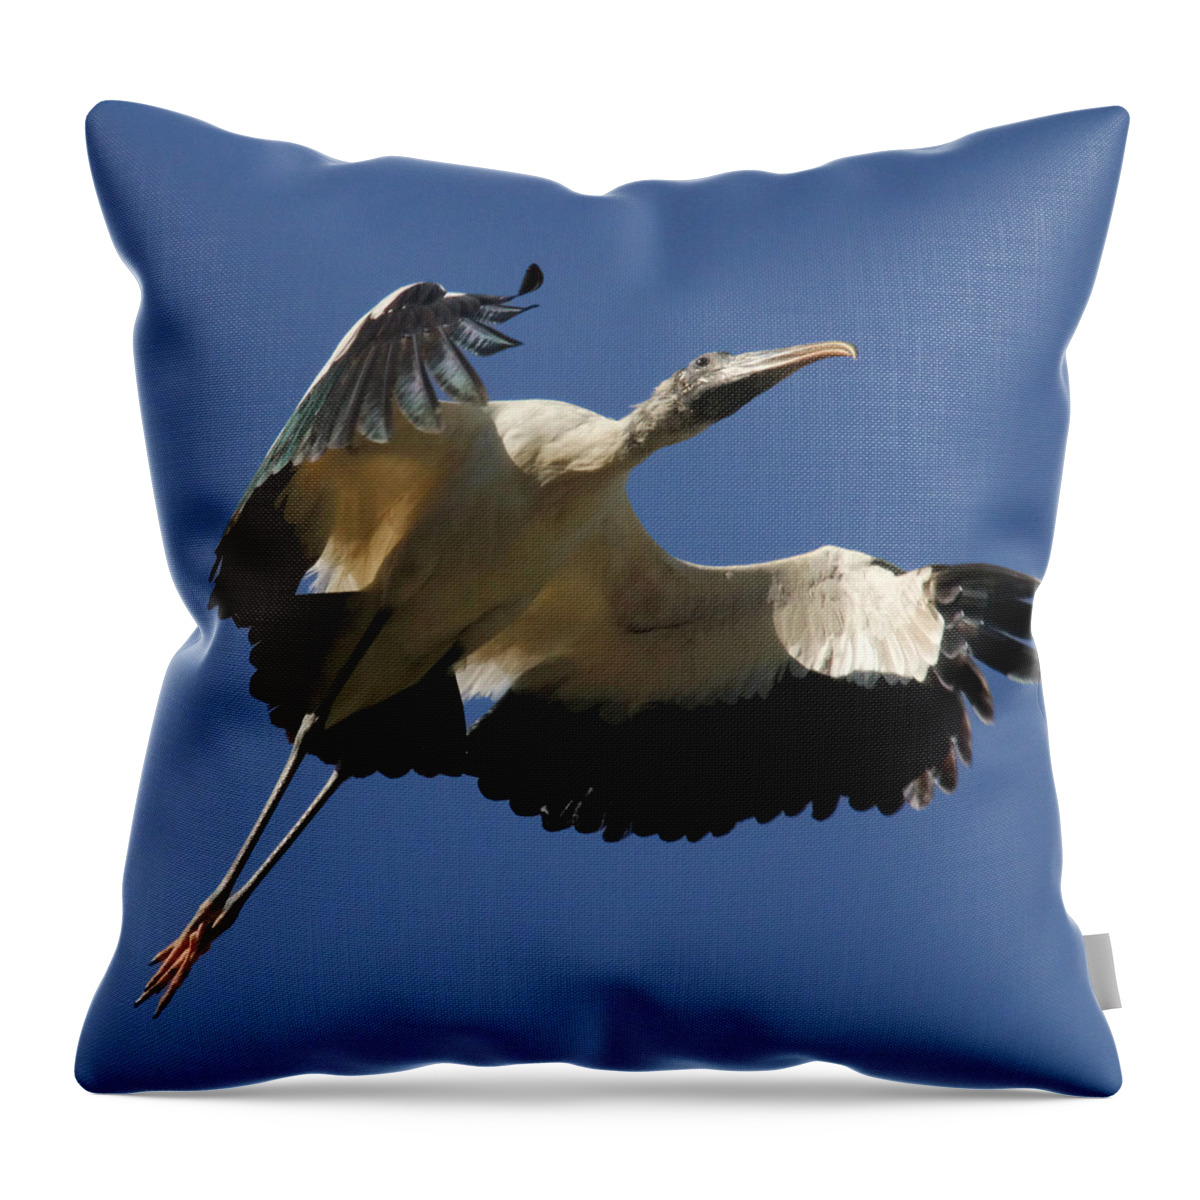 Wood Stork Throw Pillow featuring the photograph Airborne by Doris Potter